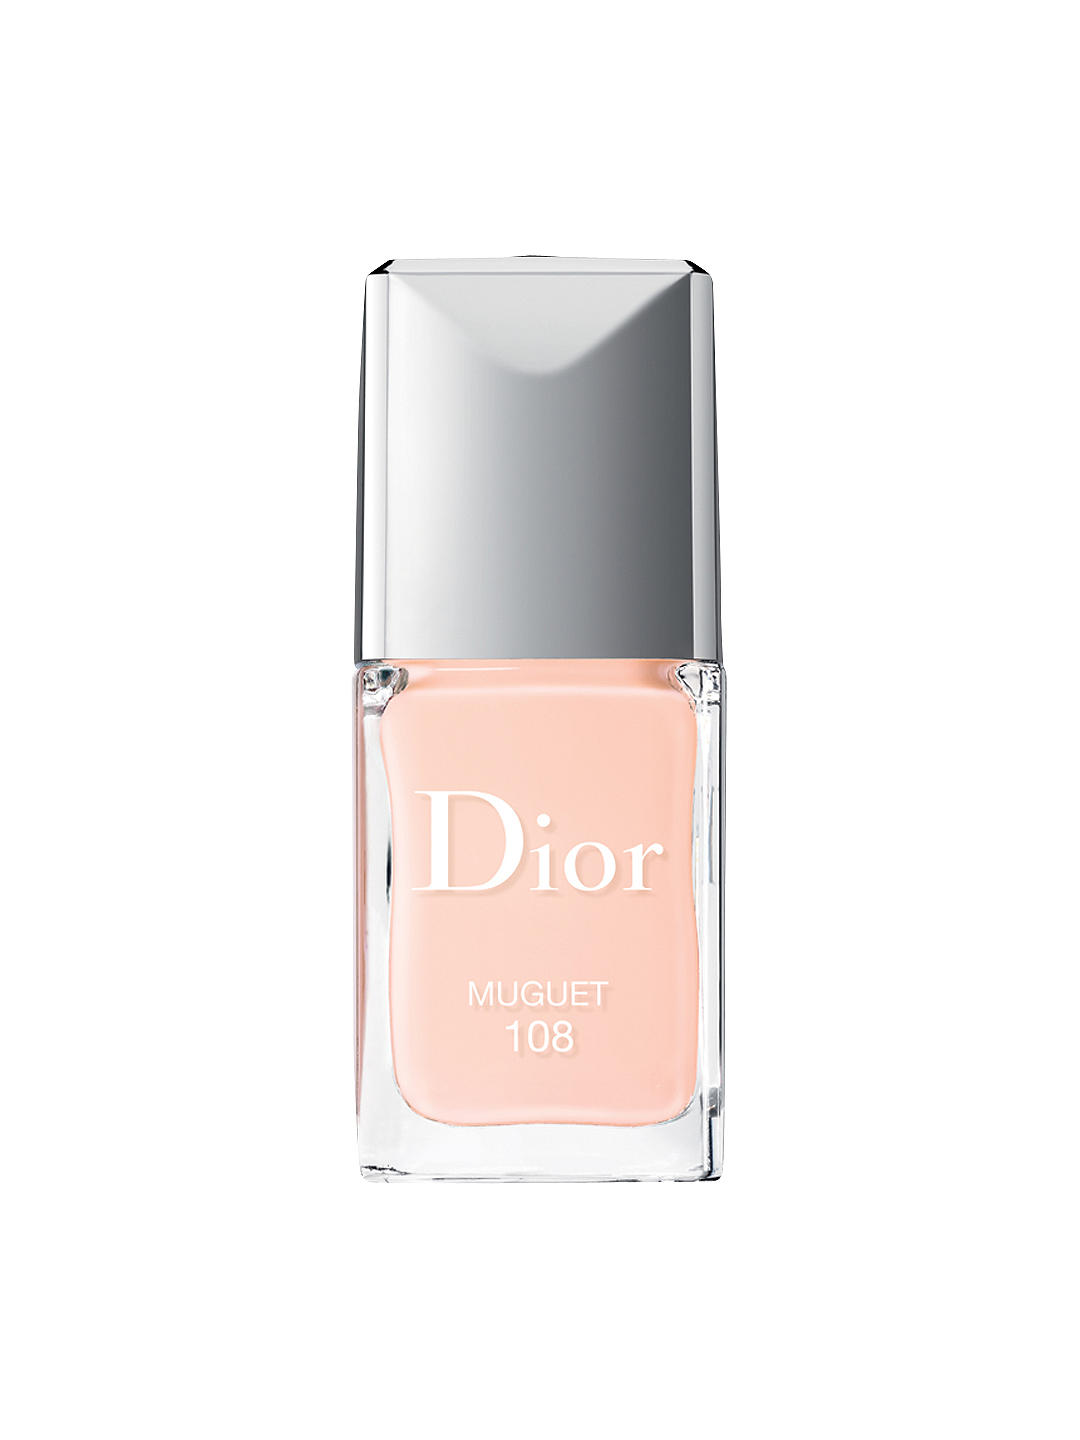 French Beauty Products Women Over 50: Dior Vernis Gel Shine & Long Wear Nail Lacquer in Muguet